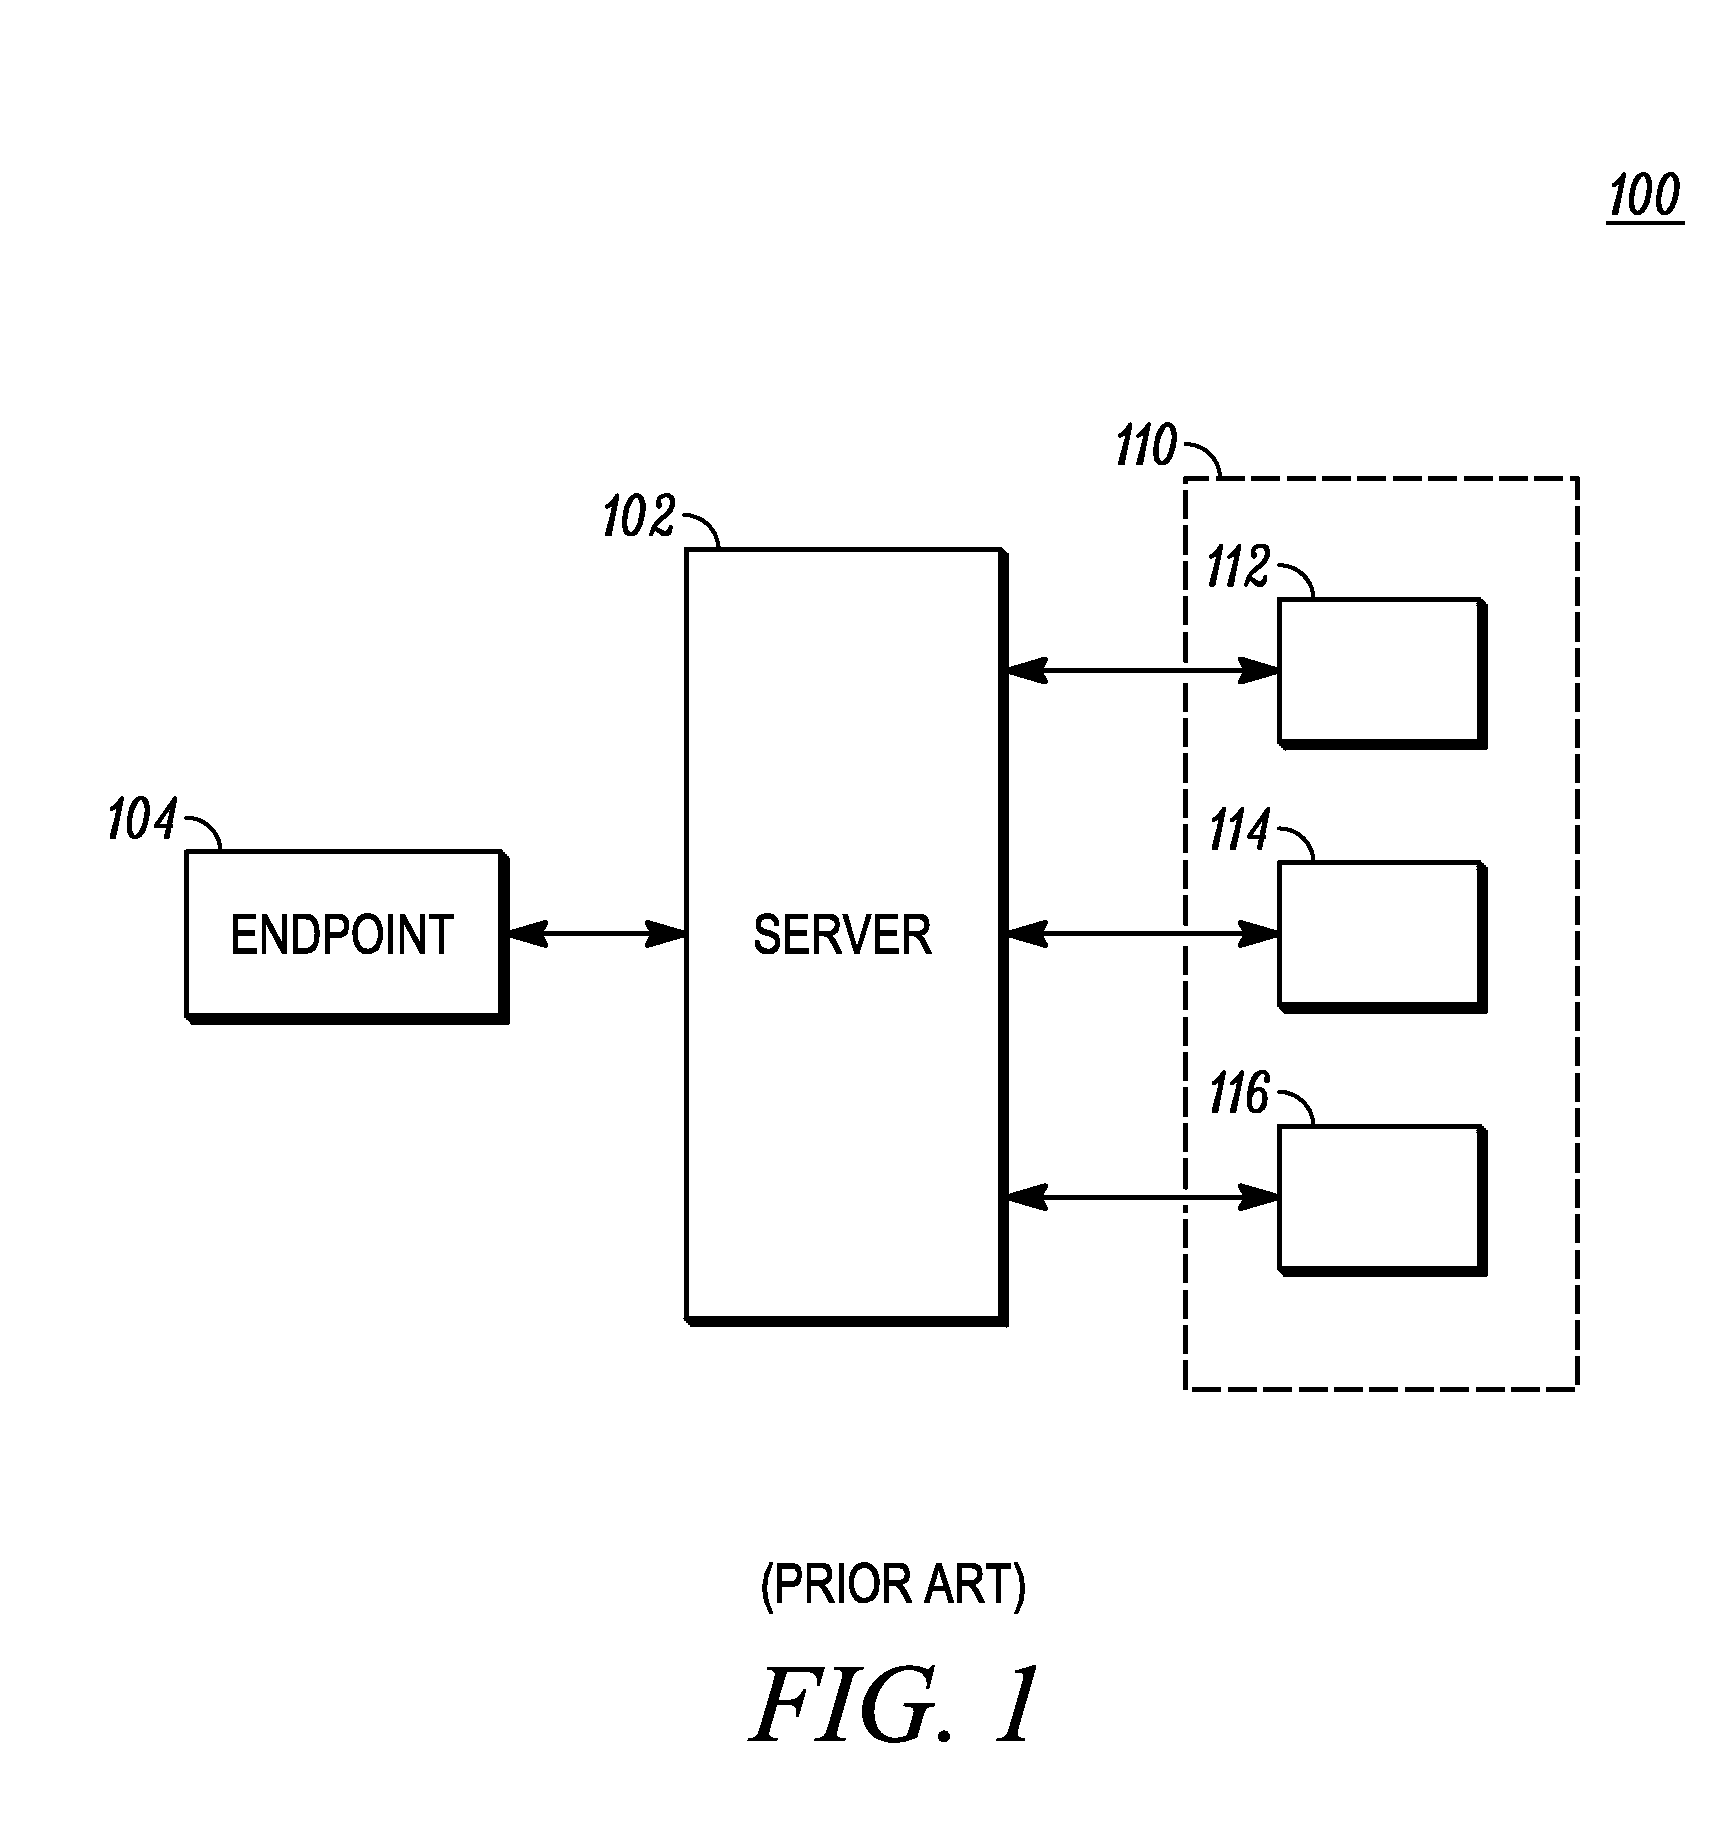 System and method for controlling and managing sessions between endpoints in a communications system